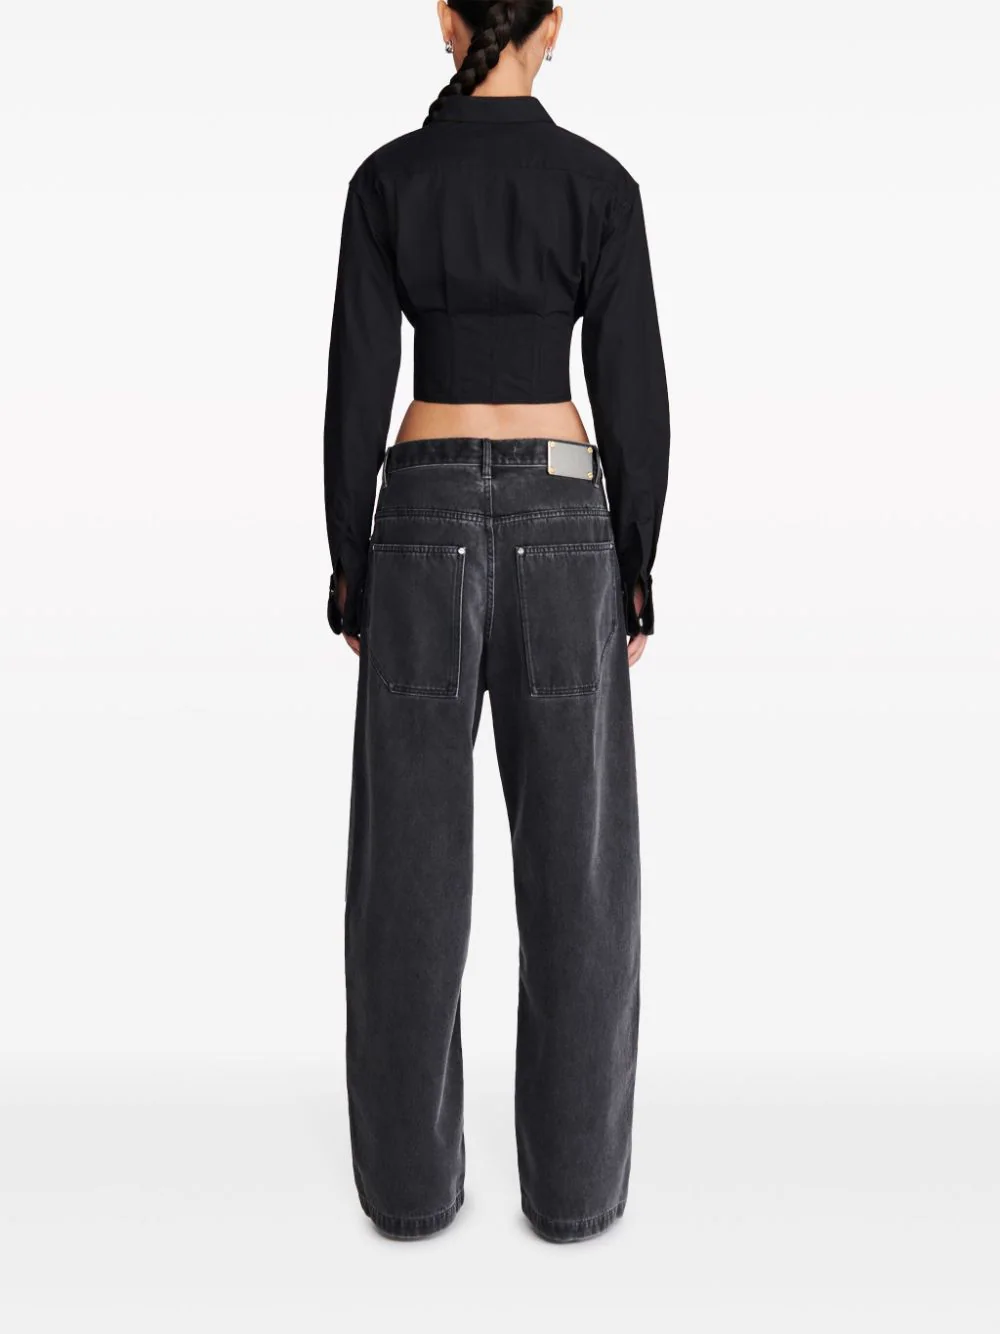 DION LEE – Atelier New York